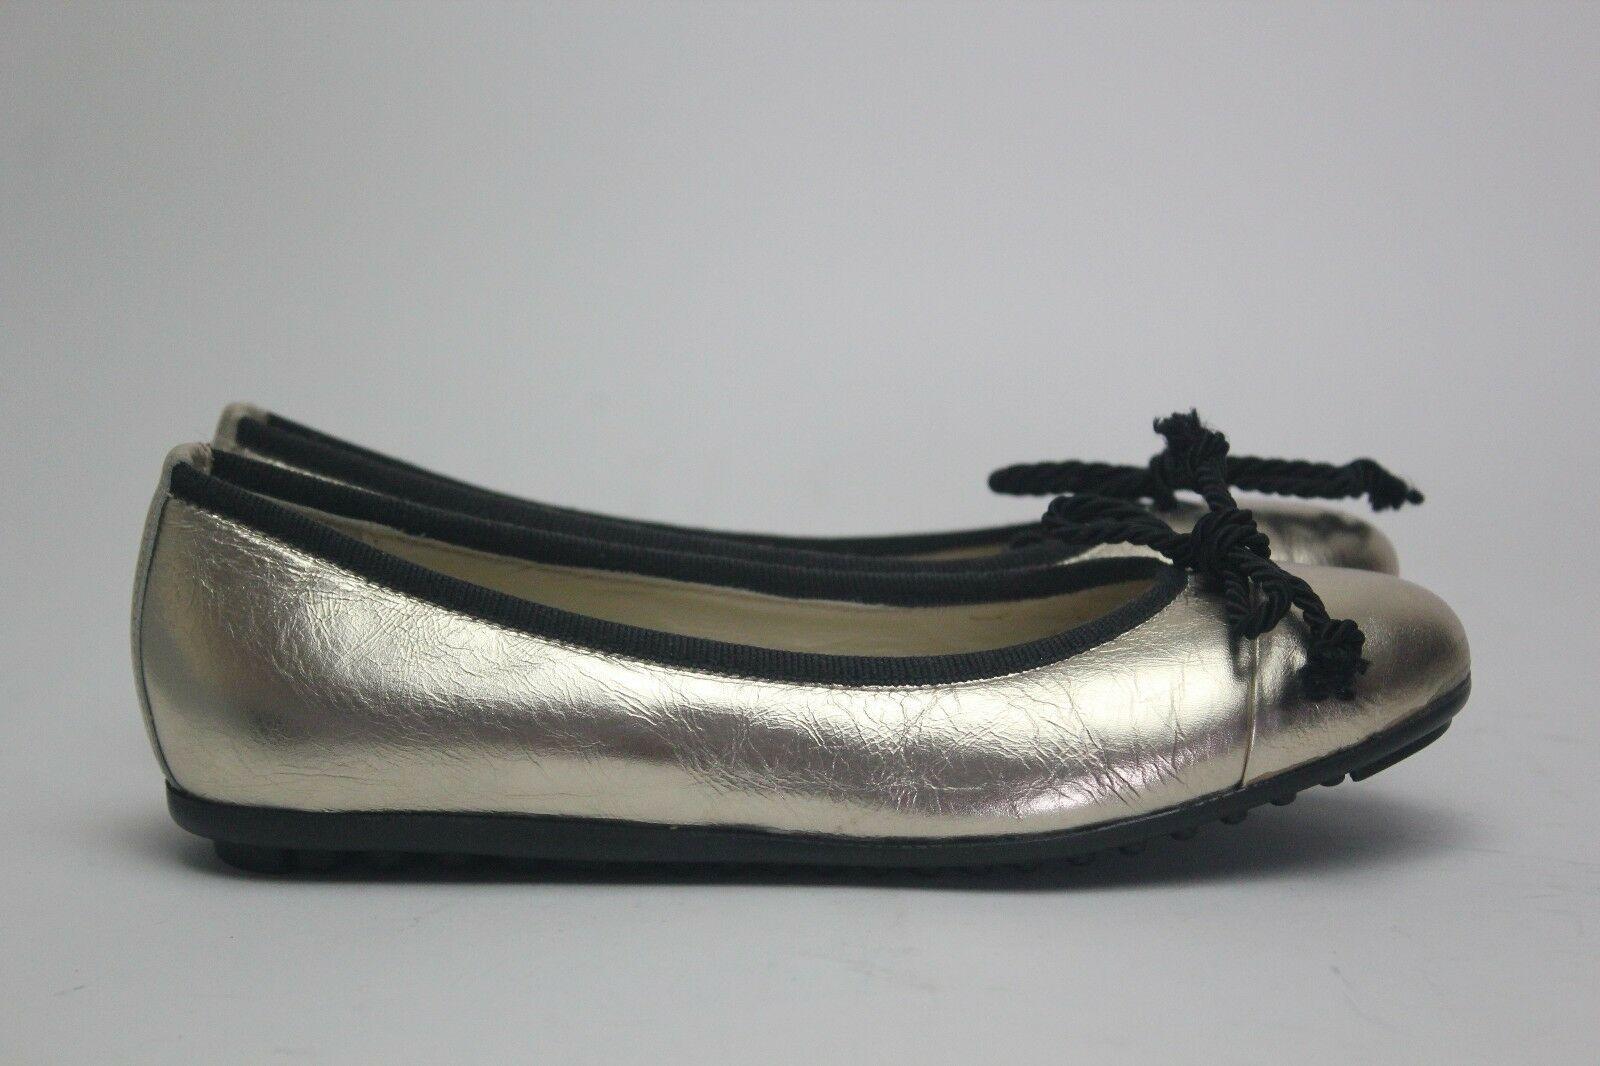 Vivi G Womens Metallic Gold Leather Ballet Flats Shoes Size 36 Made in Italy - SVNYFancy